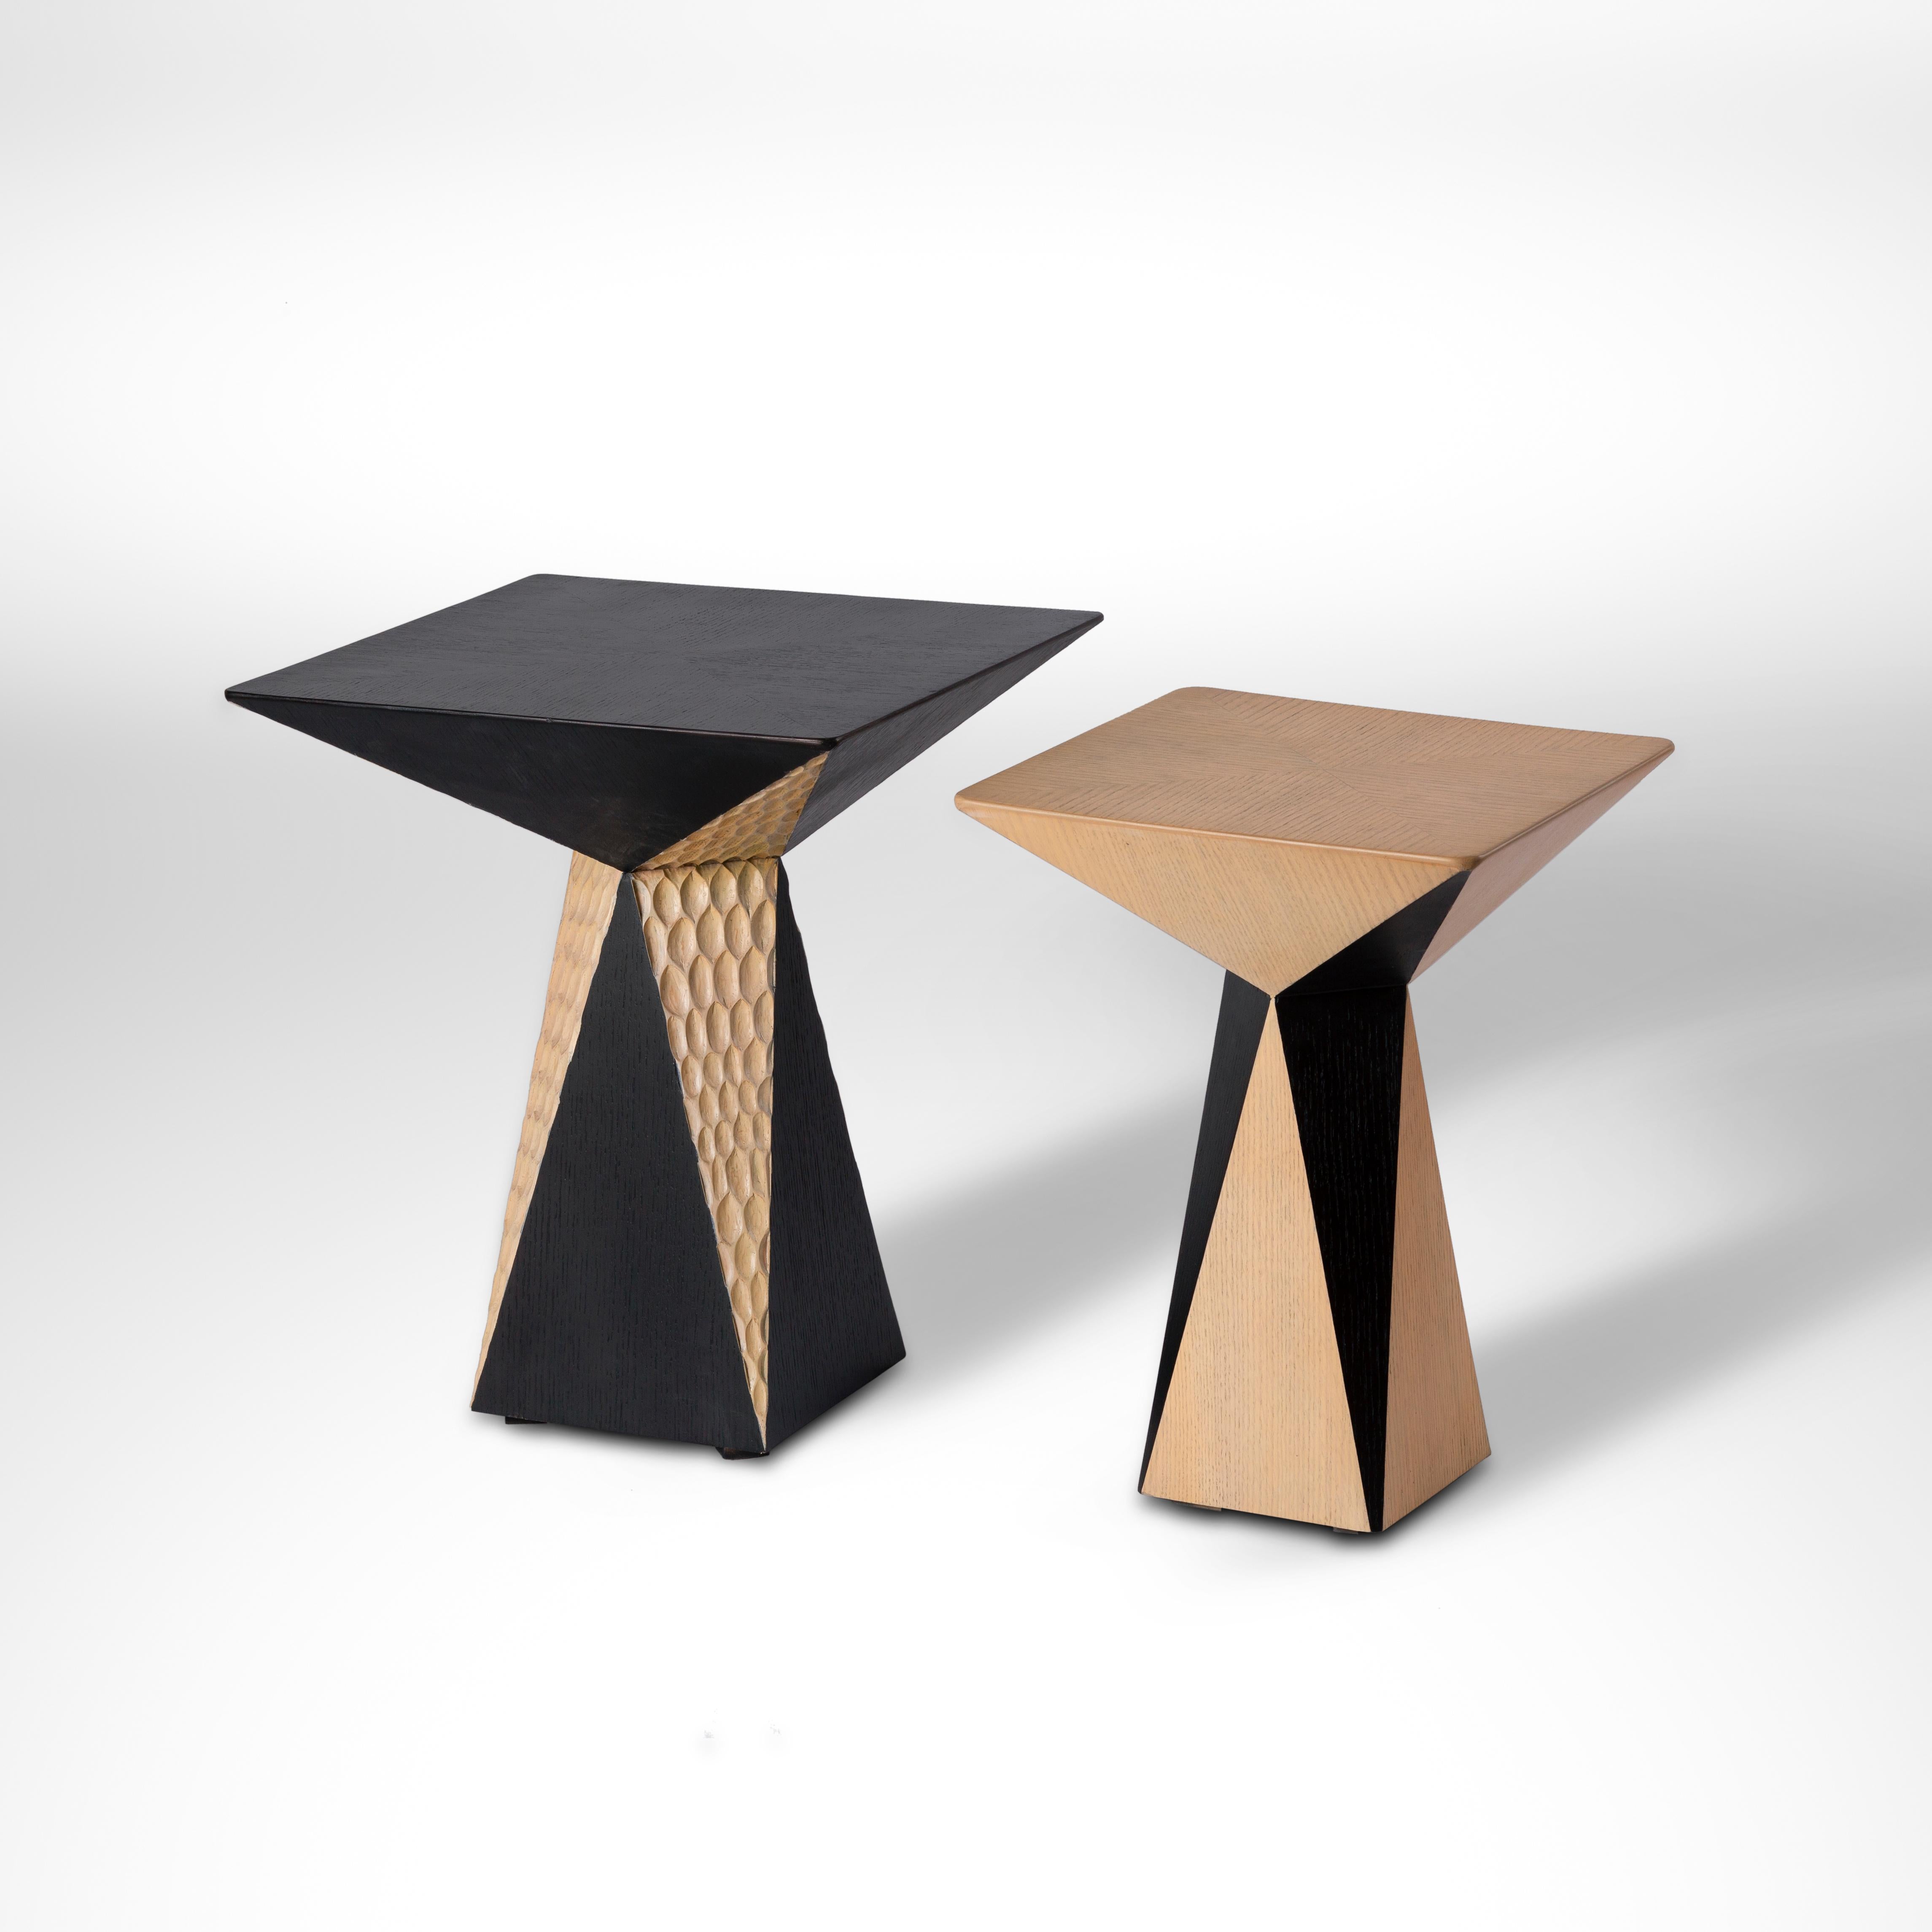 Hand carved oak side table inspired by Crystal Formations of the Oases in Egypt.
Our edgy CRYSTAL I accent table draws its silhouettes from the crystalline formations found near the Bahareya Oases. The contrasting lines and colors evoke the image